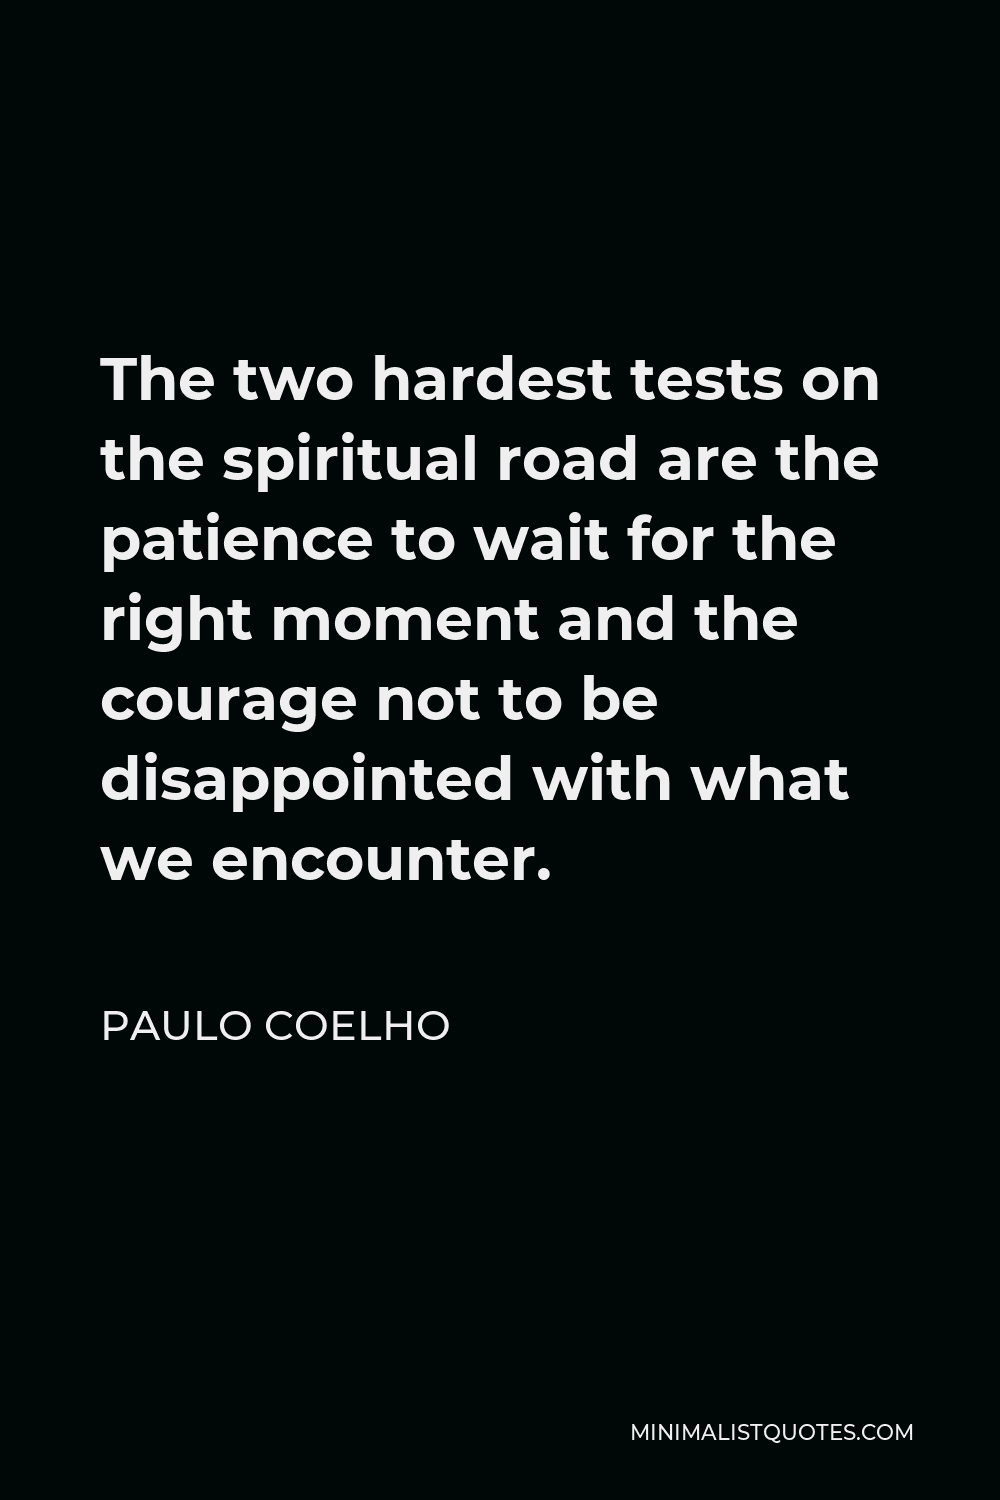 Paulo Coelho Quote - The two hardest tests on the spiritual road are the patience to wait for the right moment and the courage not to be disappointed with what we encounter.